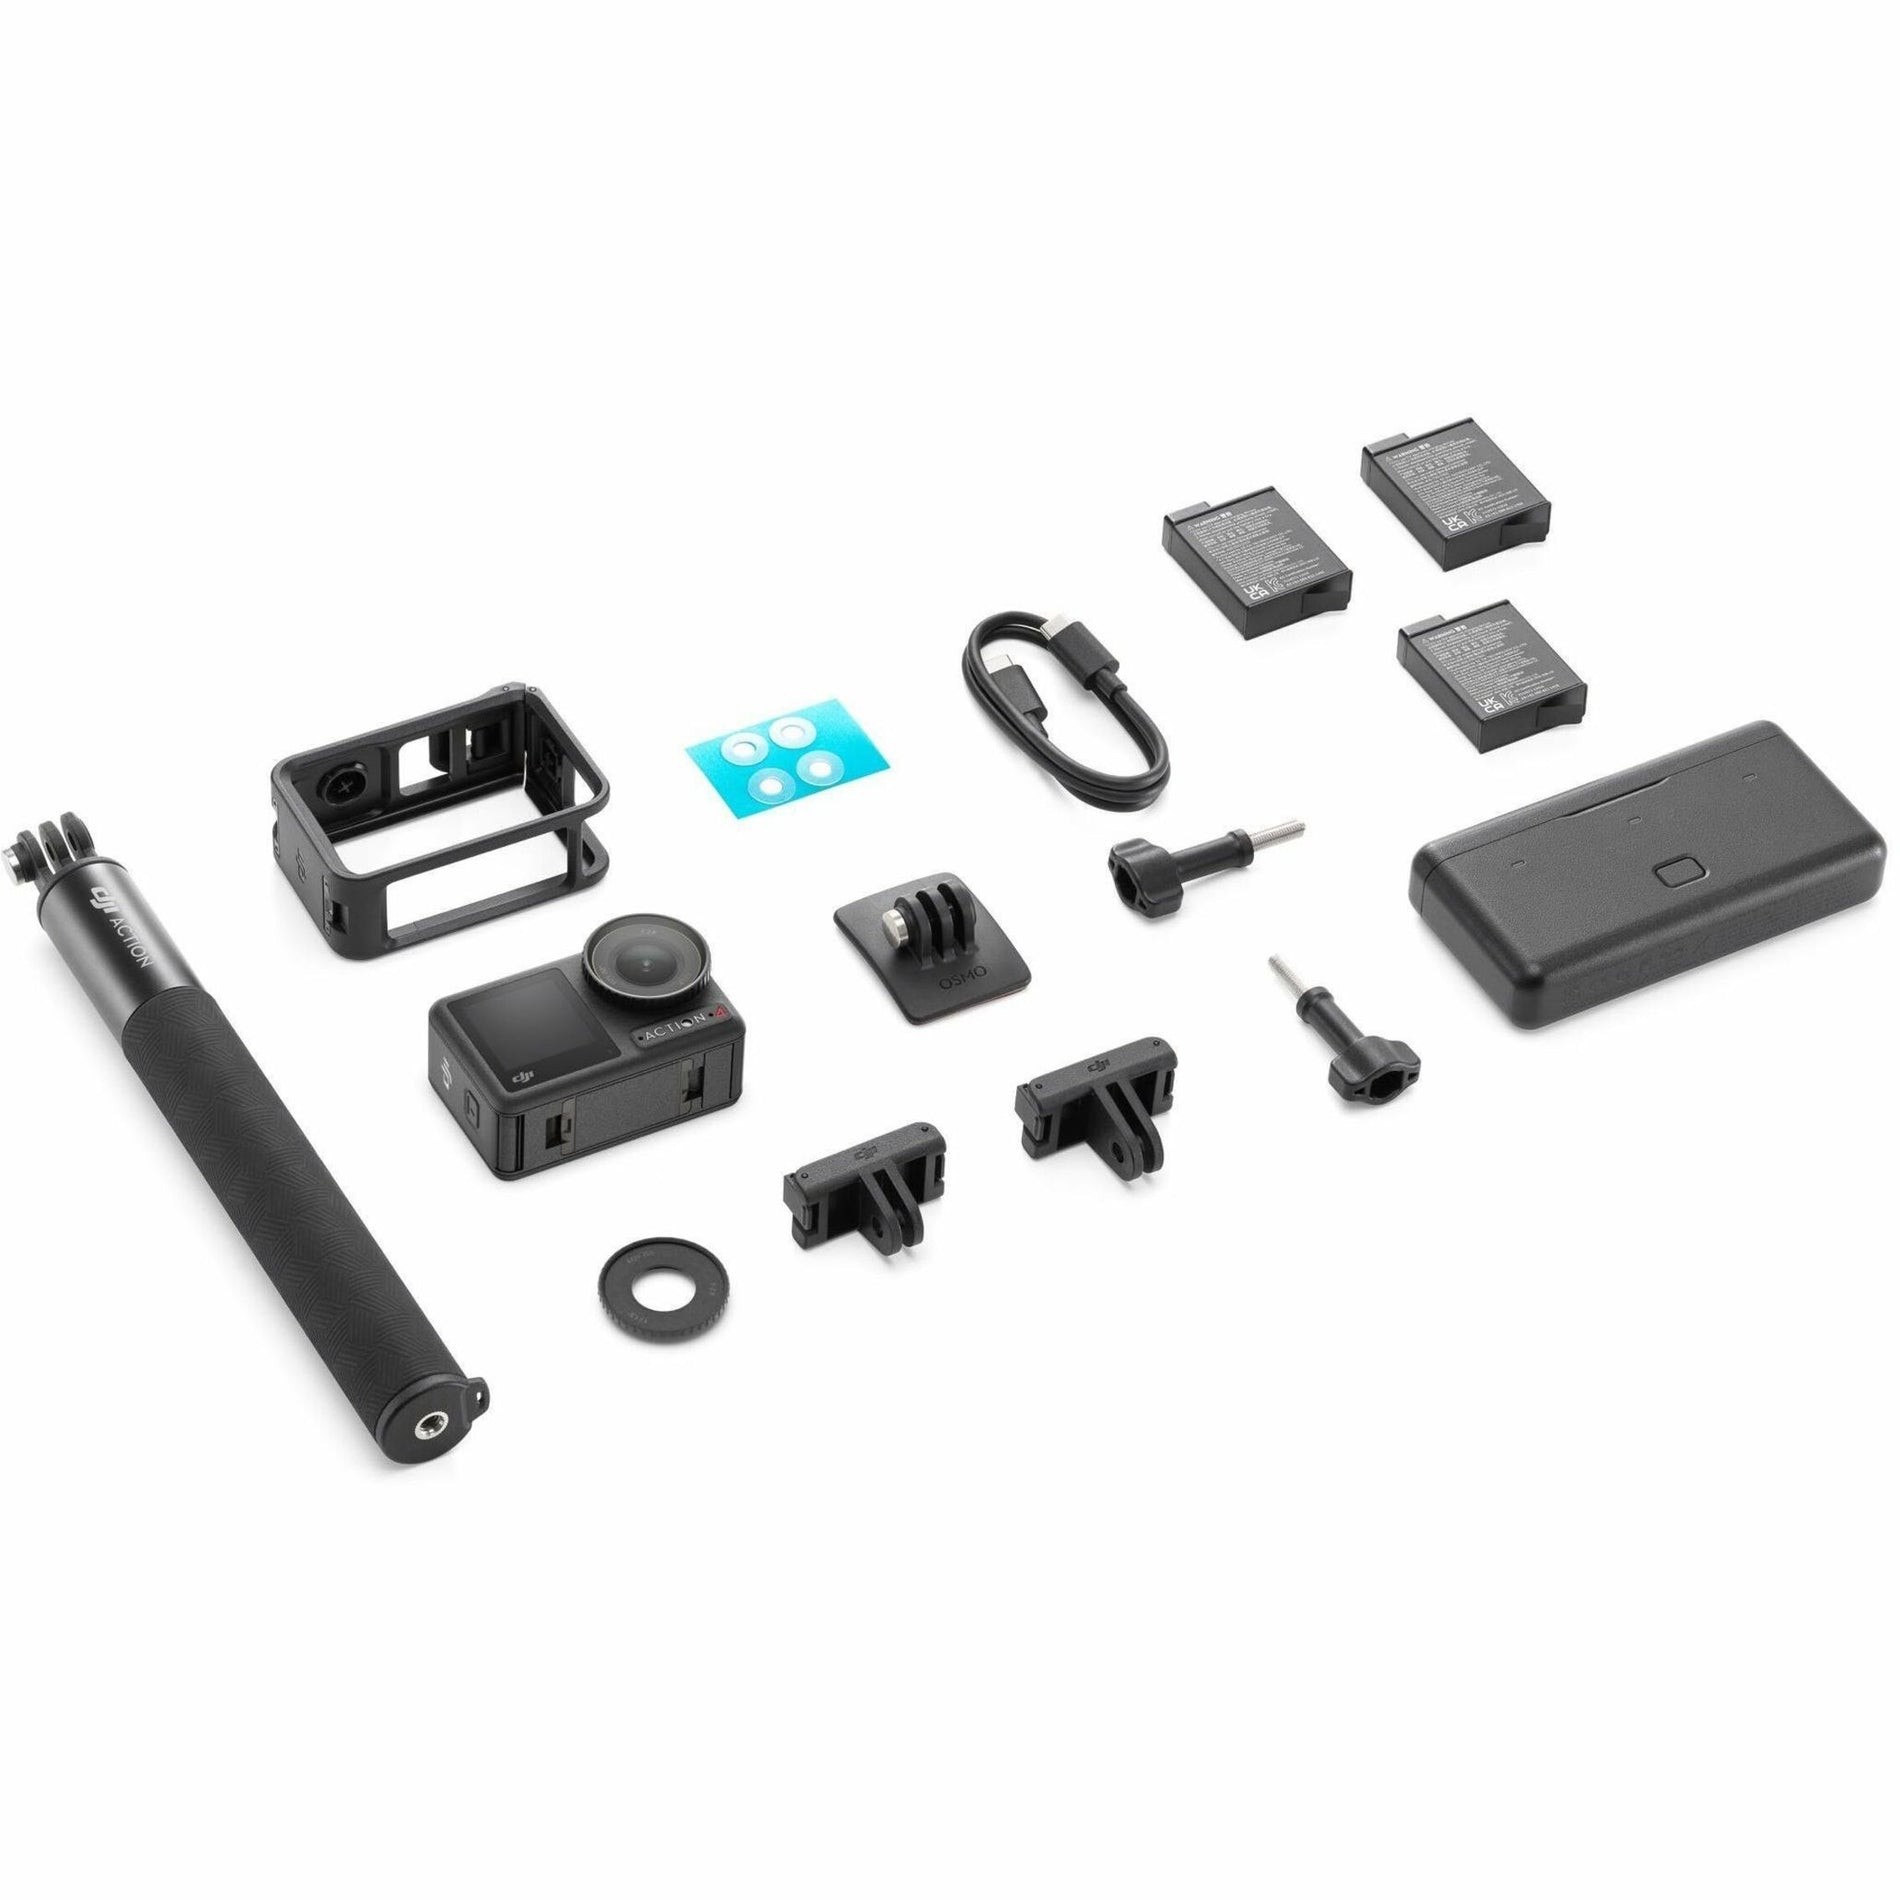 DJI CP.OS.00000270.01 Osmo Action 4 Adventure Combo, Digital Camcorder with Touchscreen